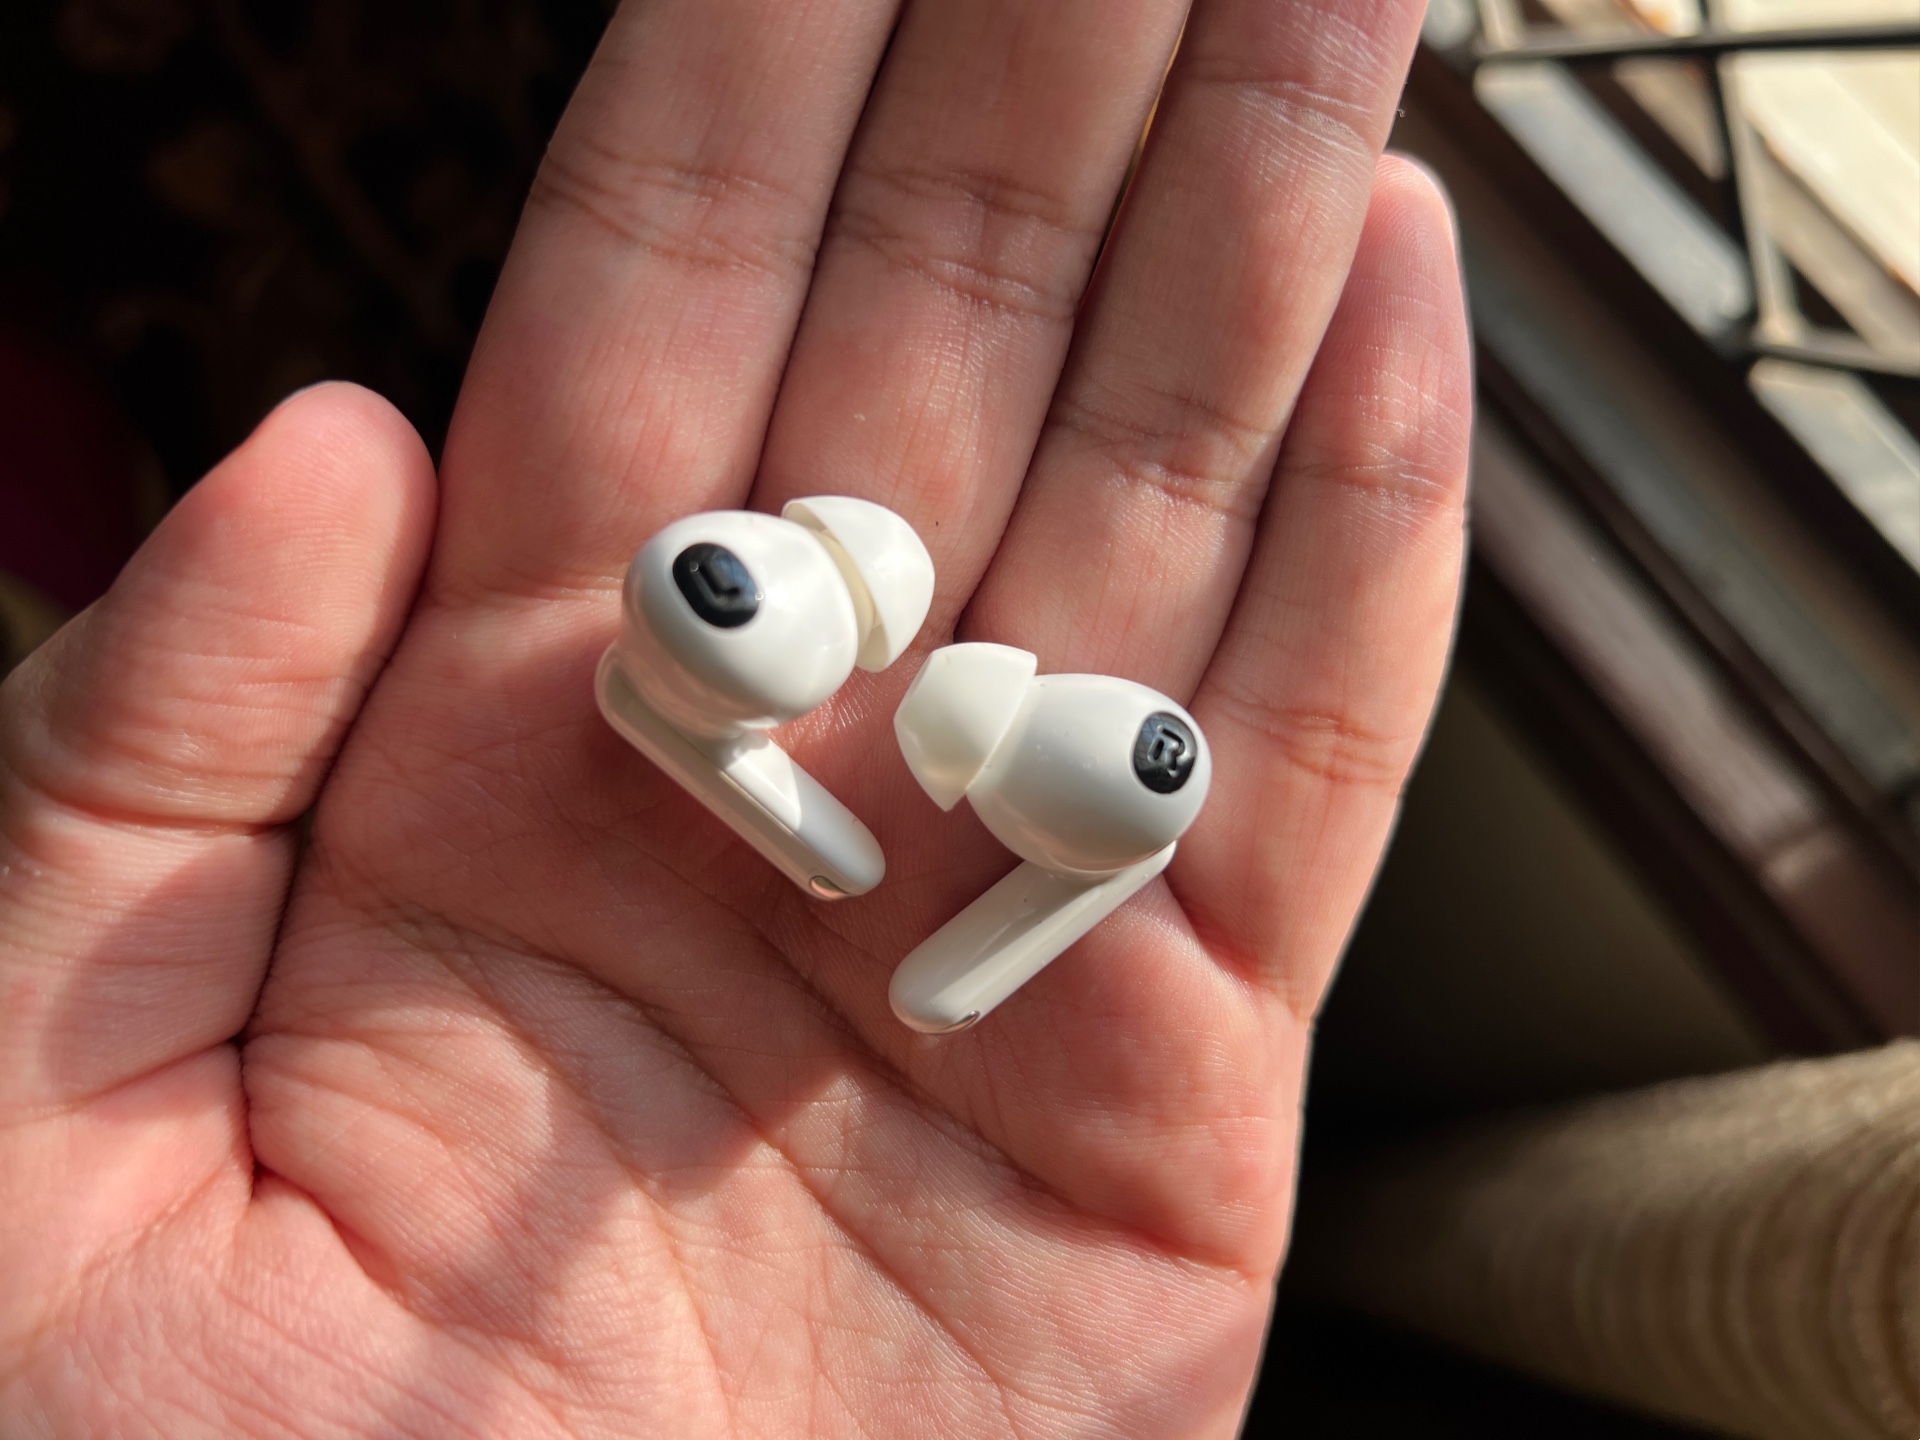 Oppo Enco X2 earbuds in hand.